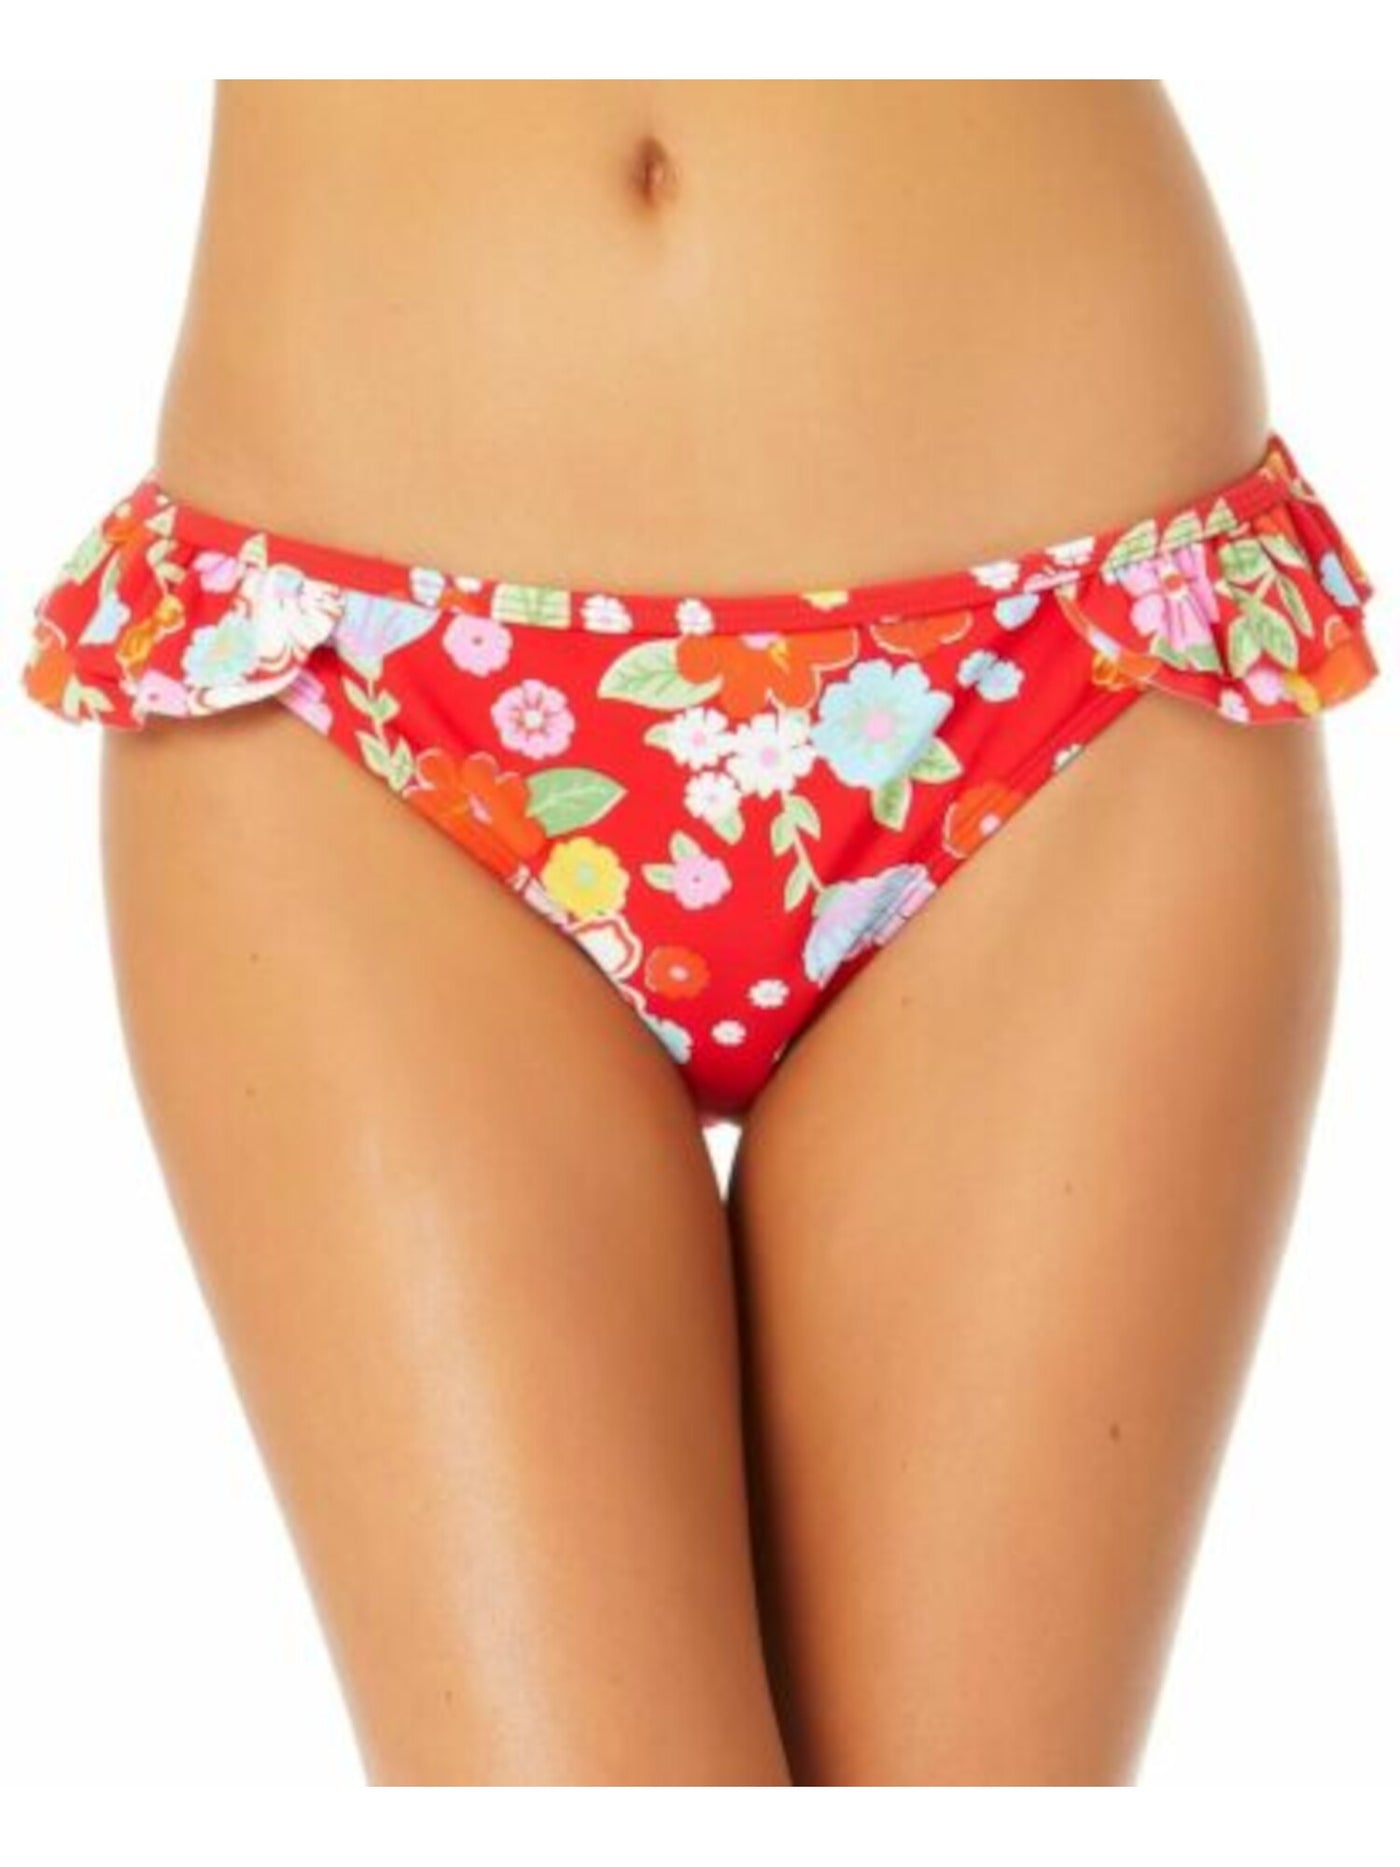 CALIFORNIA SUNSHINE Women's Red Floral Stretch Lined Bikini Moderate Coverage Ruffled Hipster Swimsuit Bottom L